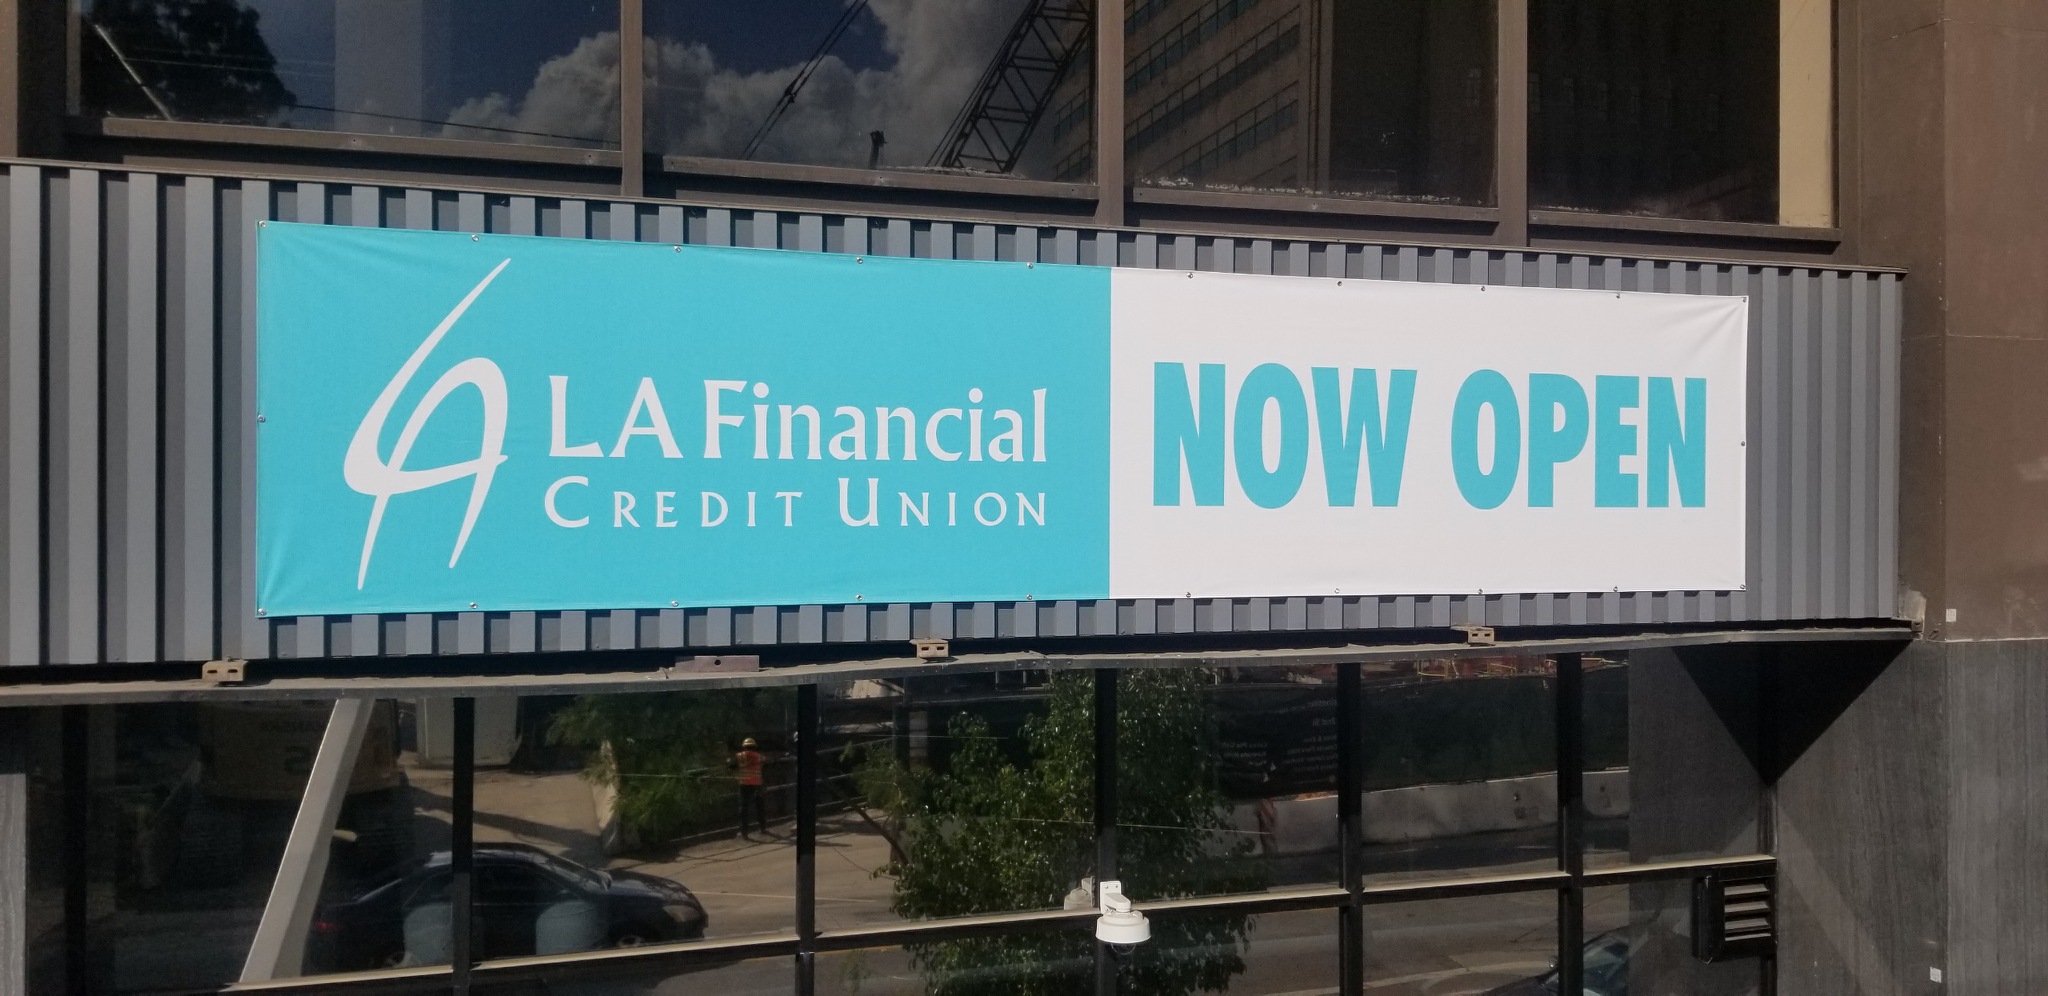 You are currently viewing Building Banners for LA Financial